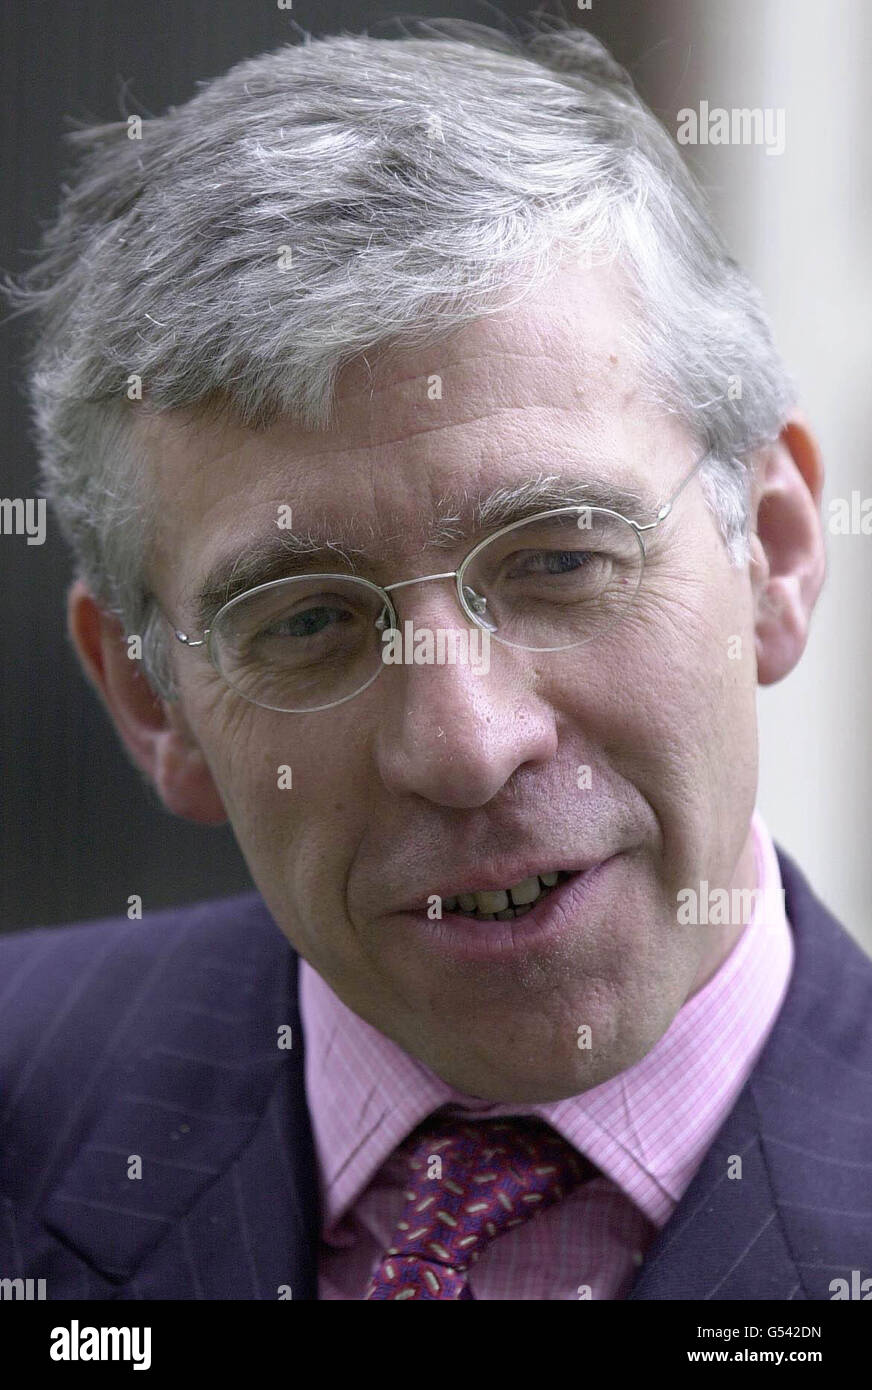 Britain's Home Secretary Jack Straw talks to the media after a Cabinet meeting. The Cabinet discussed the fuel shortage facing the country following a week of protests outside oil refineries which has begun to ease. * 17/10/00: Crime levels in England and Wales have continued to fall, new figures revealed. The British Crime Survey - billed as the most comprehensive overview of crime levels - showed a 10% drop in 1999 compared to 1997 when Labour came to power. But the figures also show that robberies are up 14% - a statistic blamed on an increase in attacks by and on 16-year-olds. Home Stock Photo